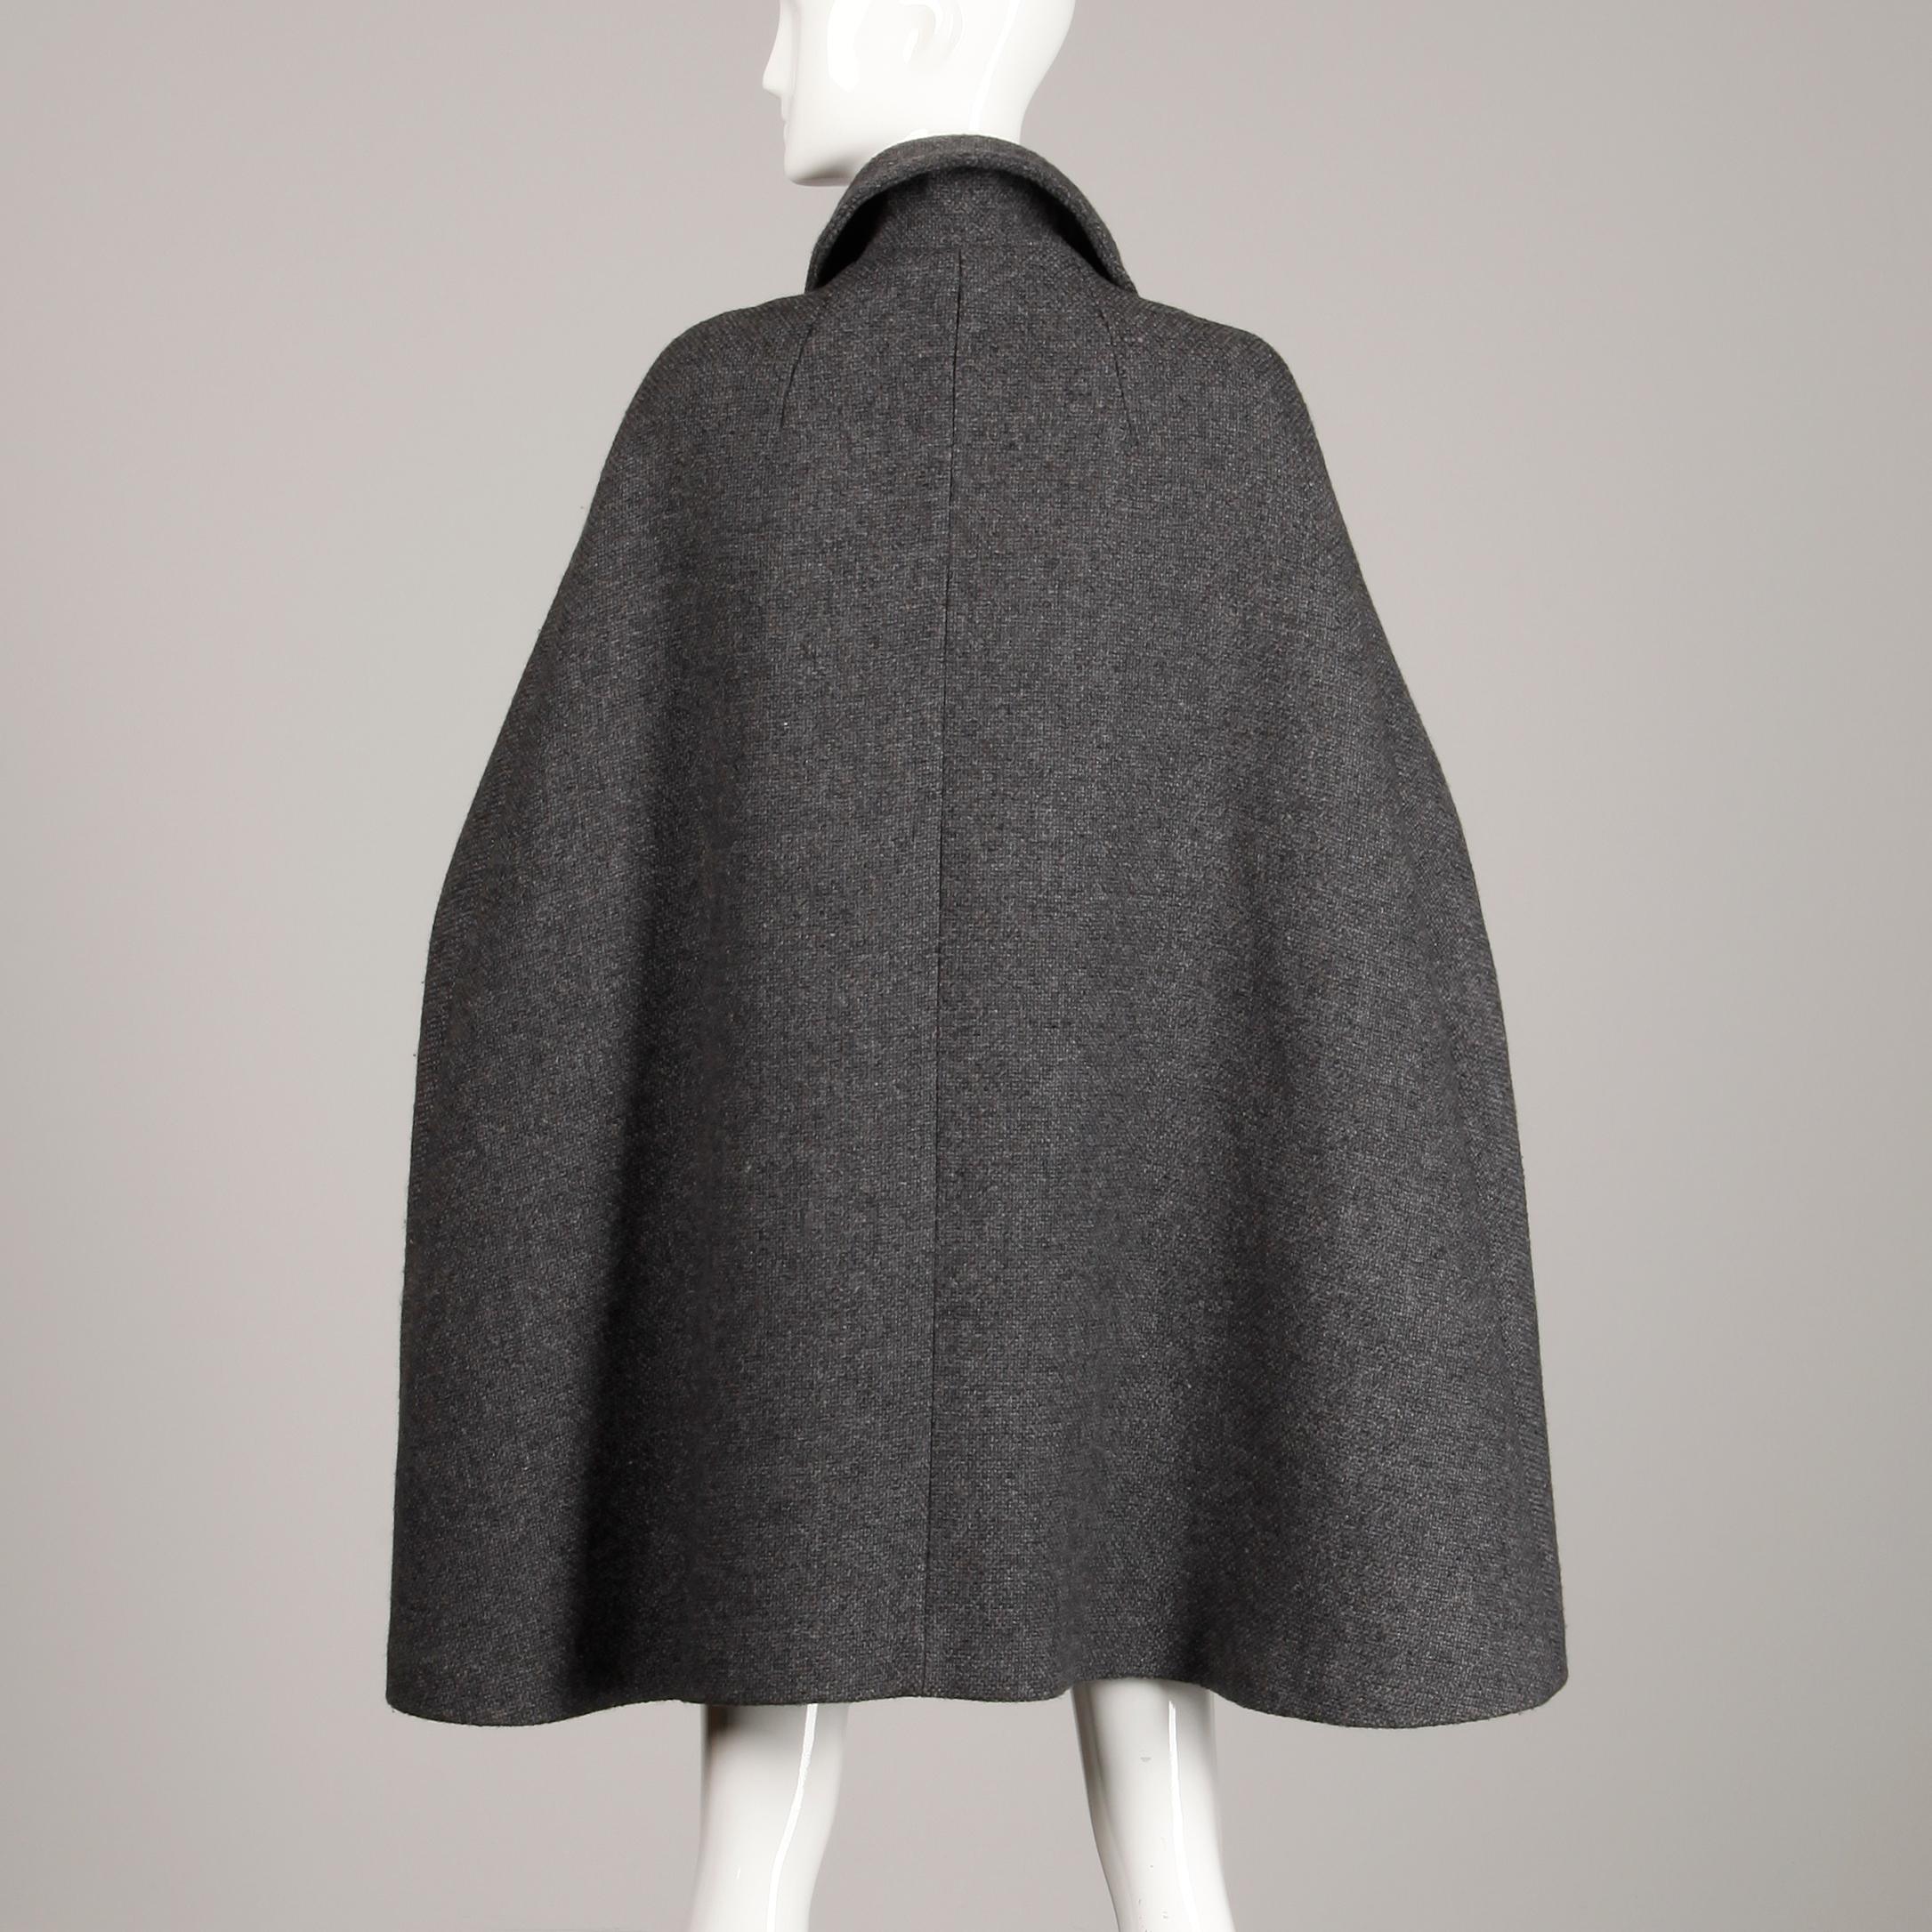 1960s/ 1970s Vintage Gray Wool Military-Inspired Cape Coat, Poncho, or Jacket 3